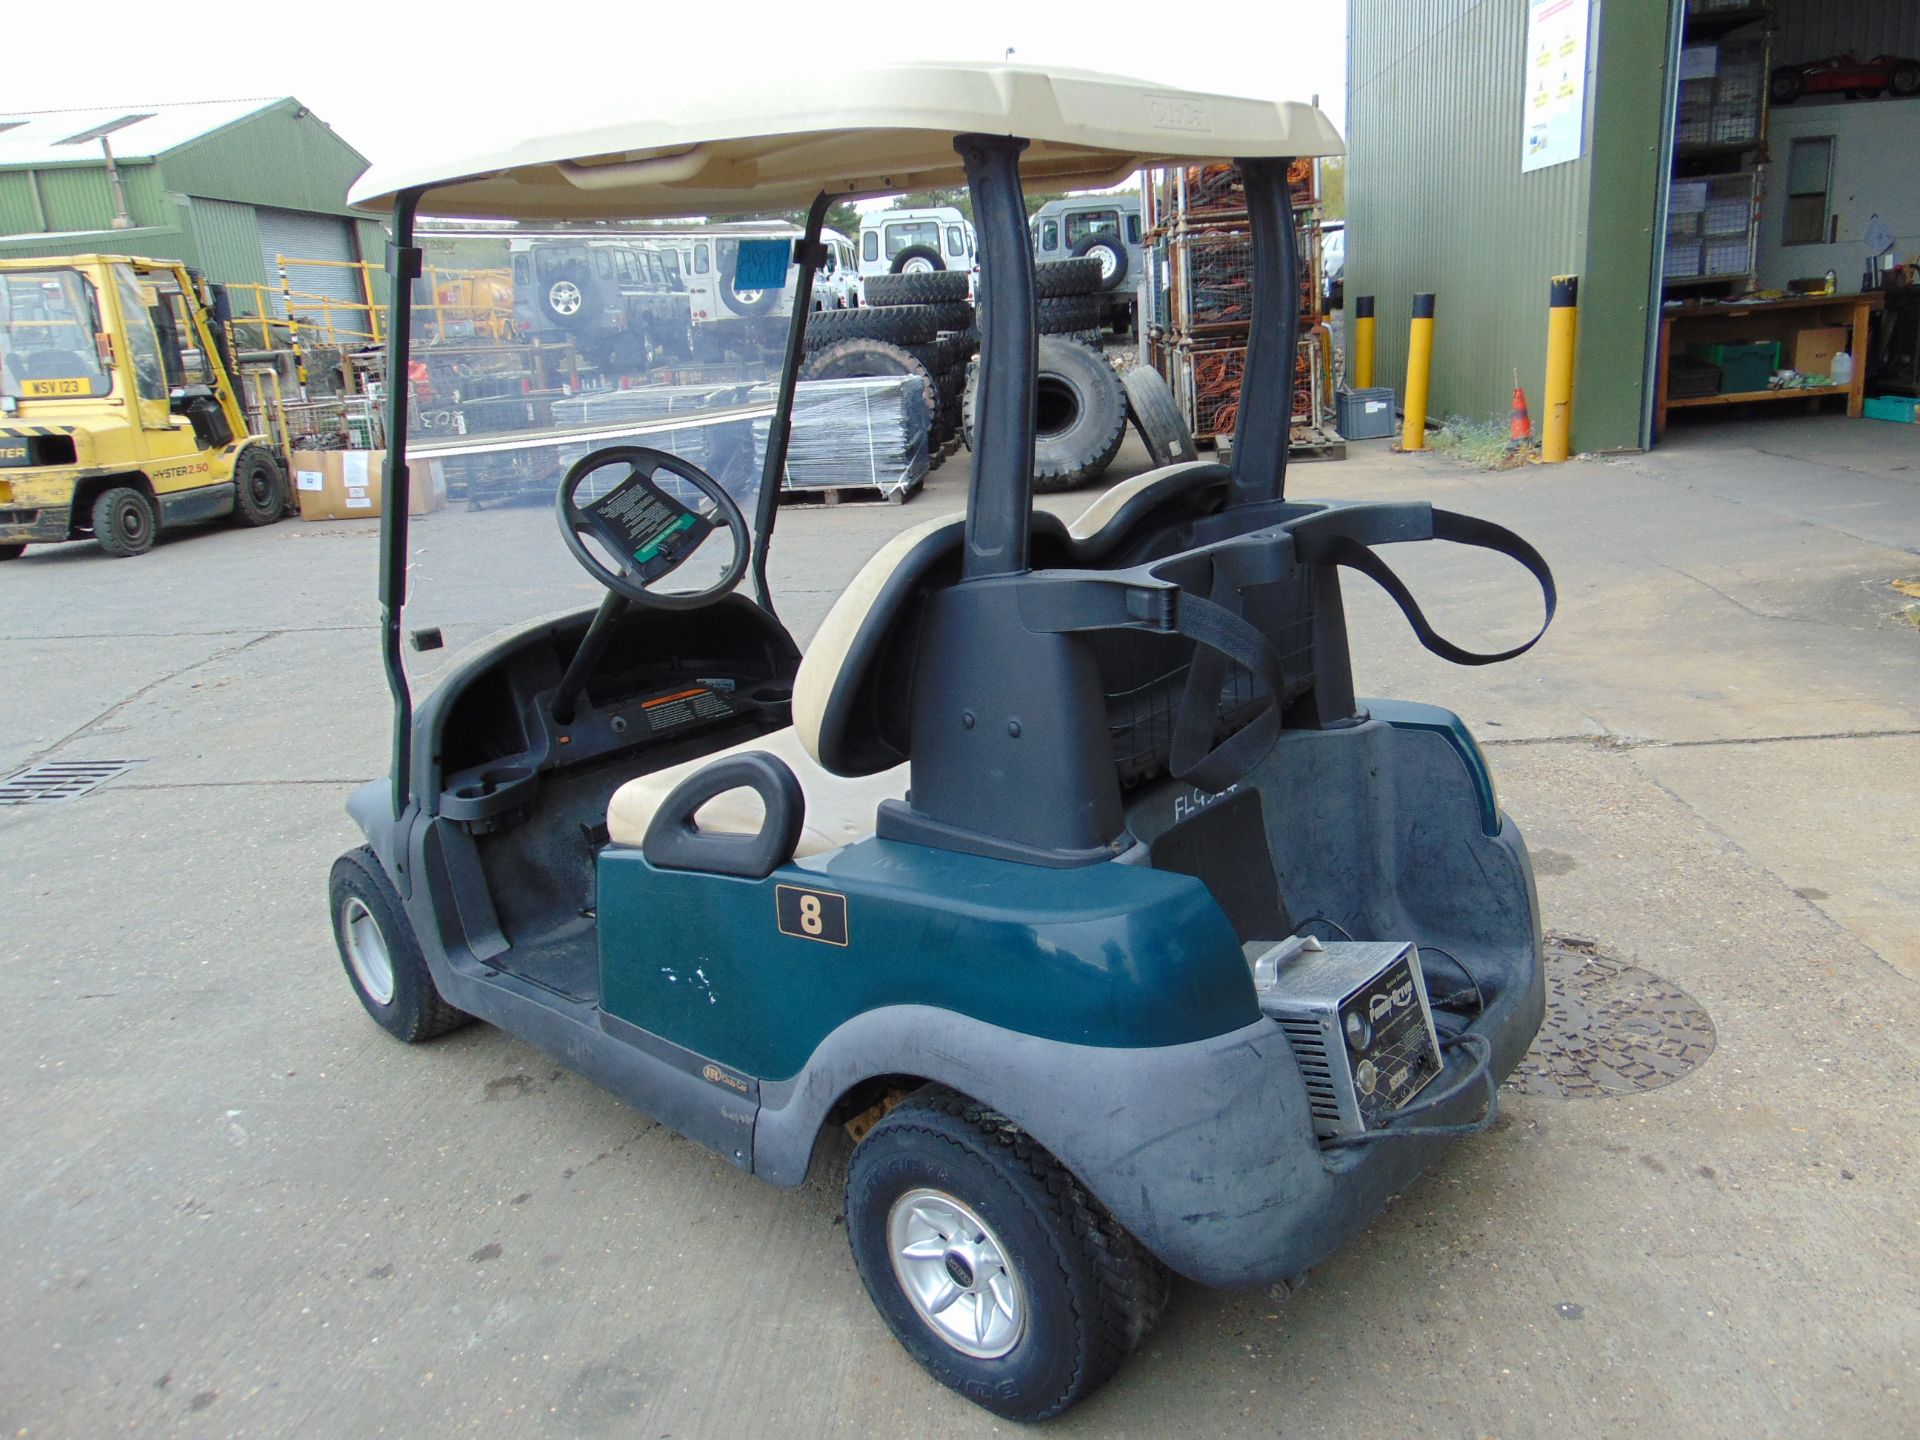 Club Car 2 Seat Electric Golf Buggy C/W Battery Charger - Image 6 of 13